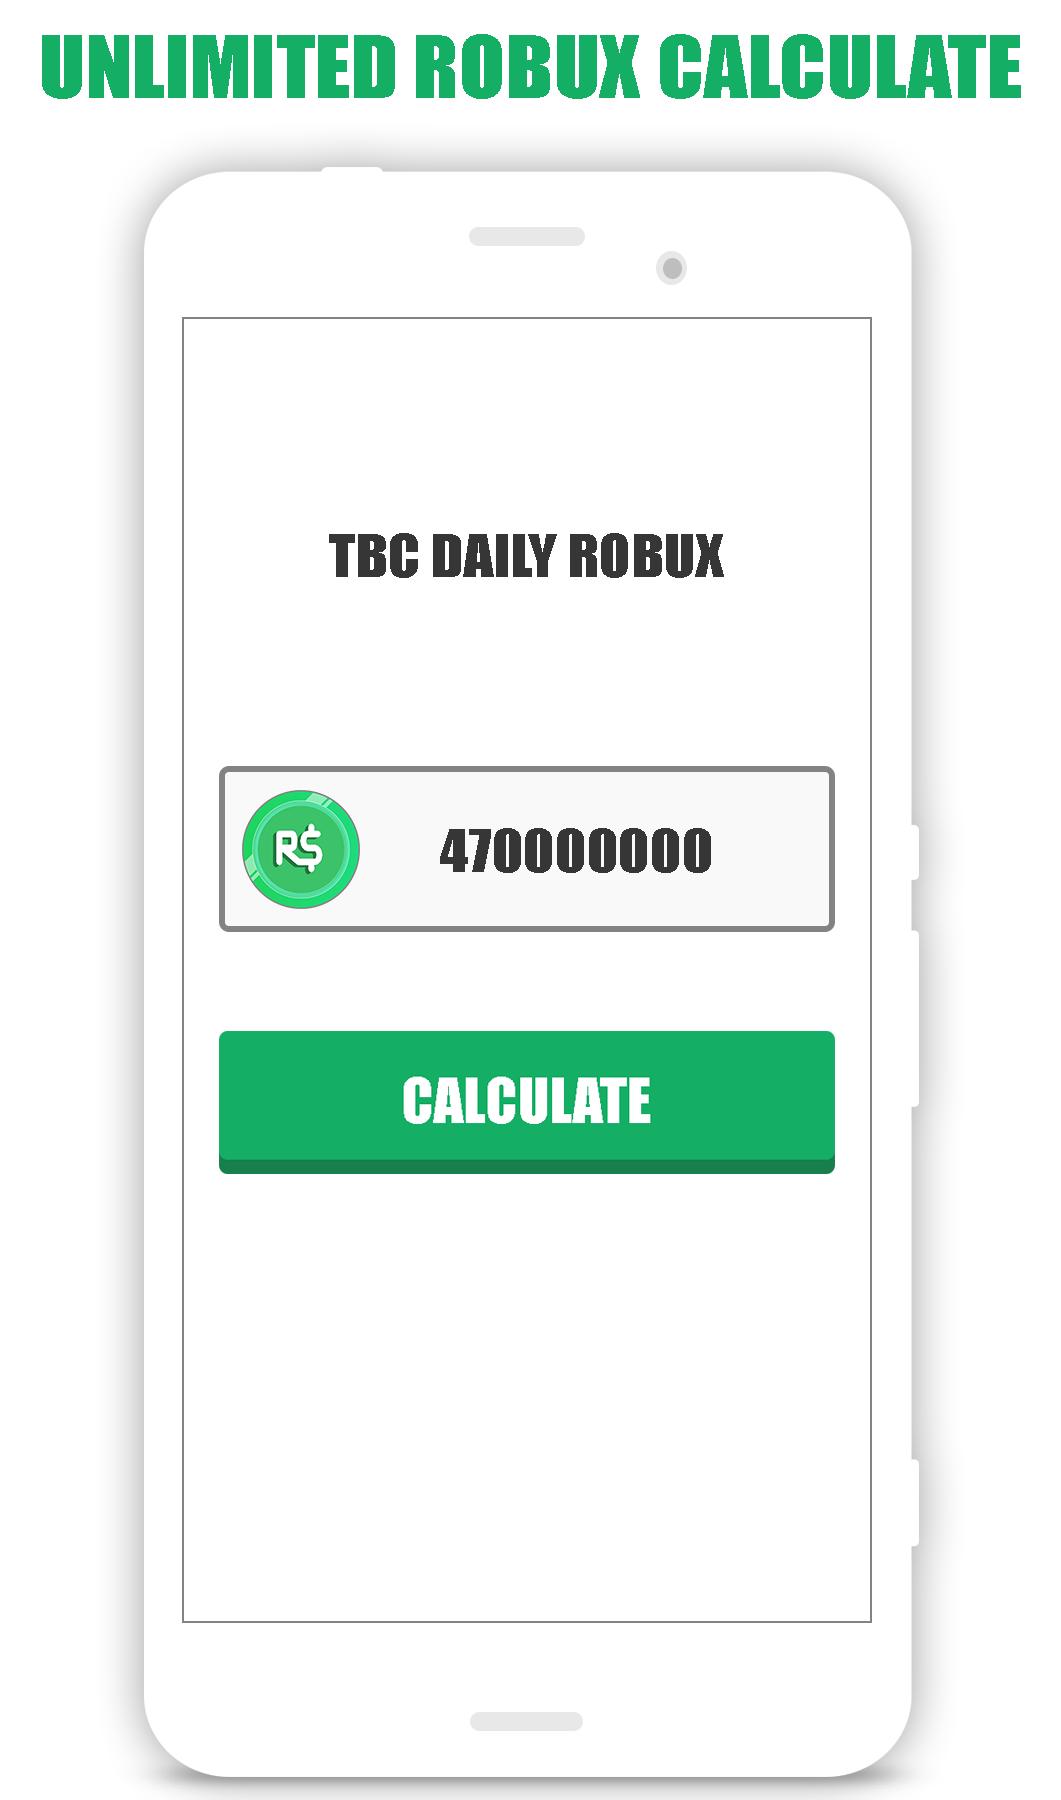 Free Robux Calculator For Roblox For Android Apk Download - dai ly robux